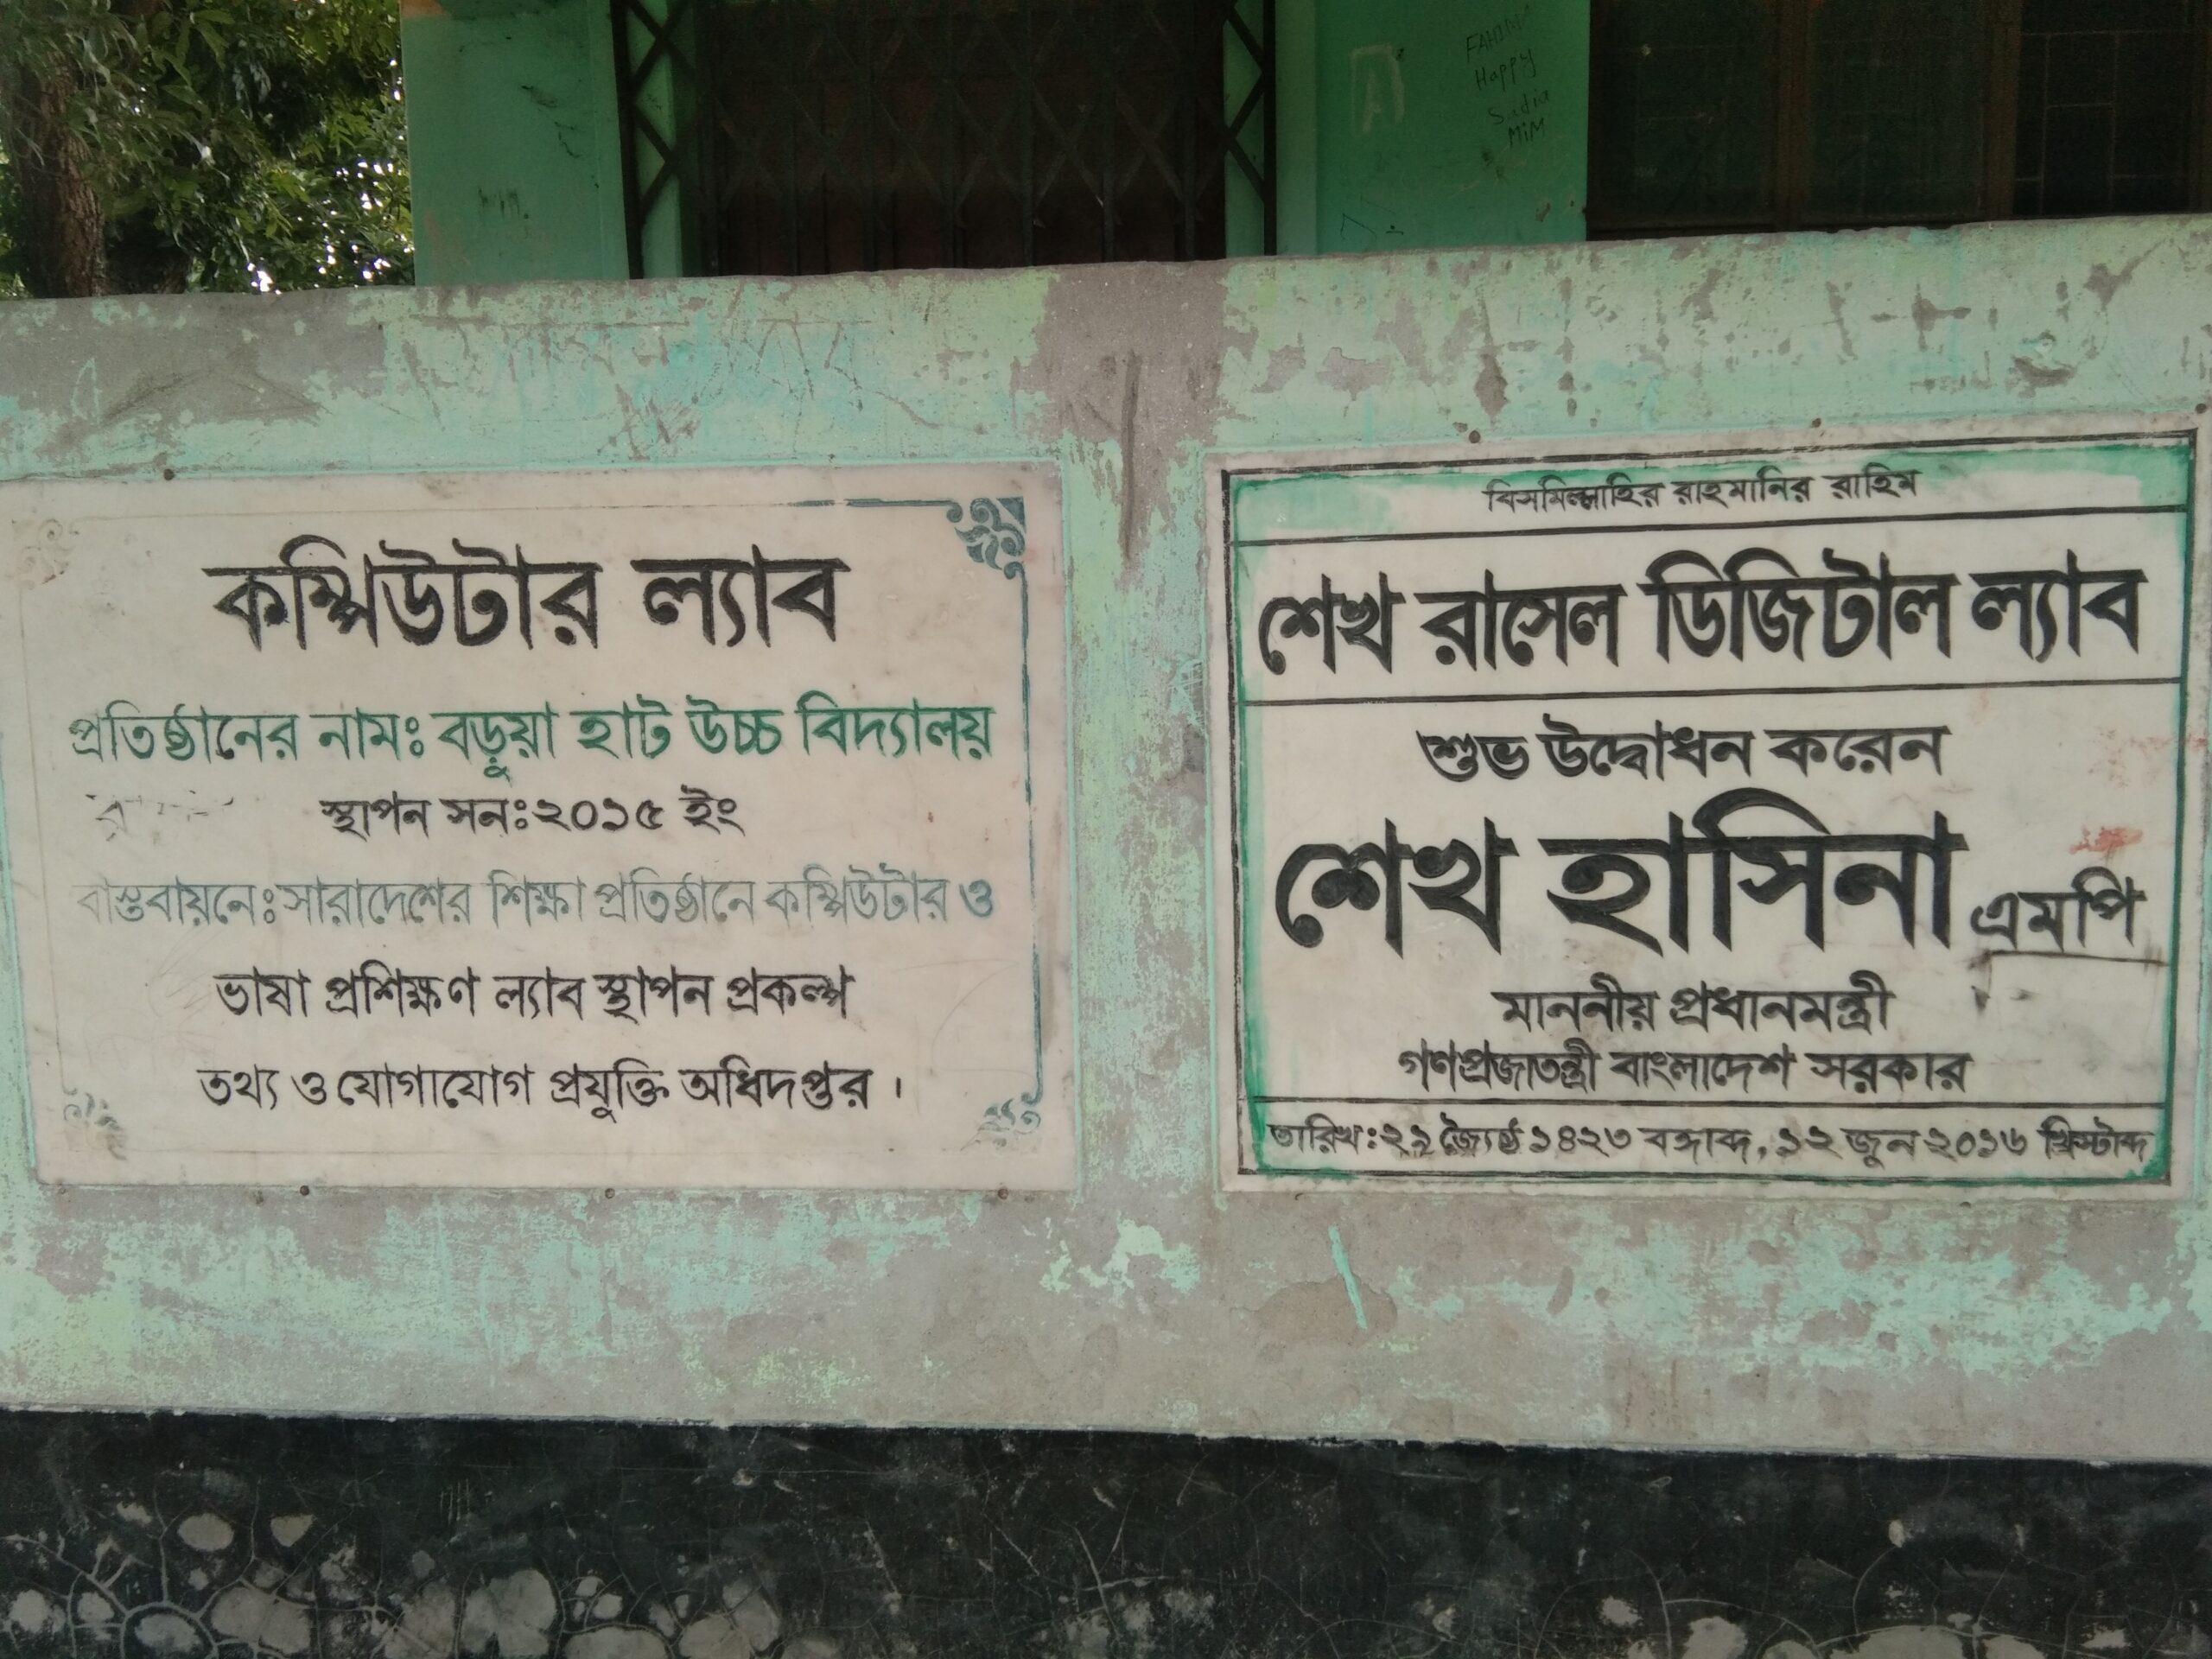 Established Time and Certificate of the Baruahat High school